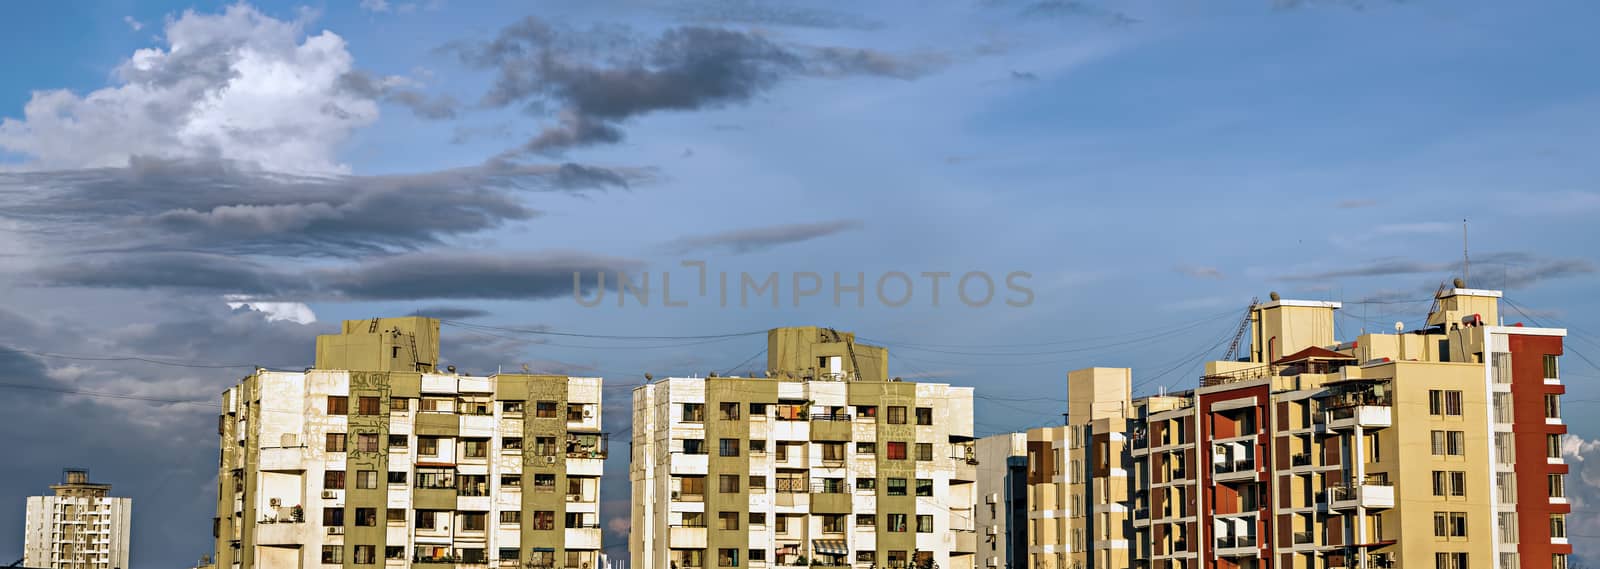 Panorama image of tall buildings in city with beautiful blue colored monsoon clouds.